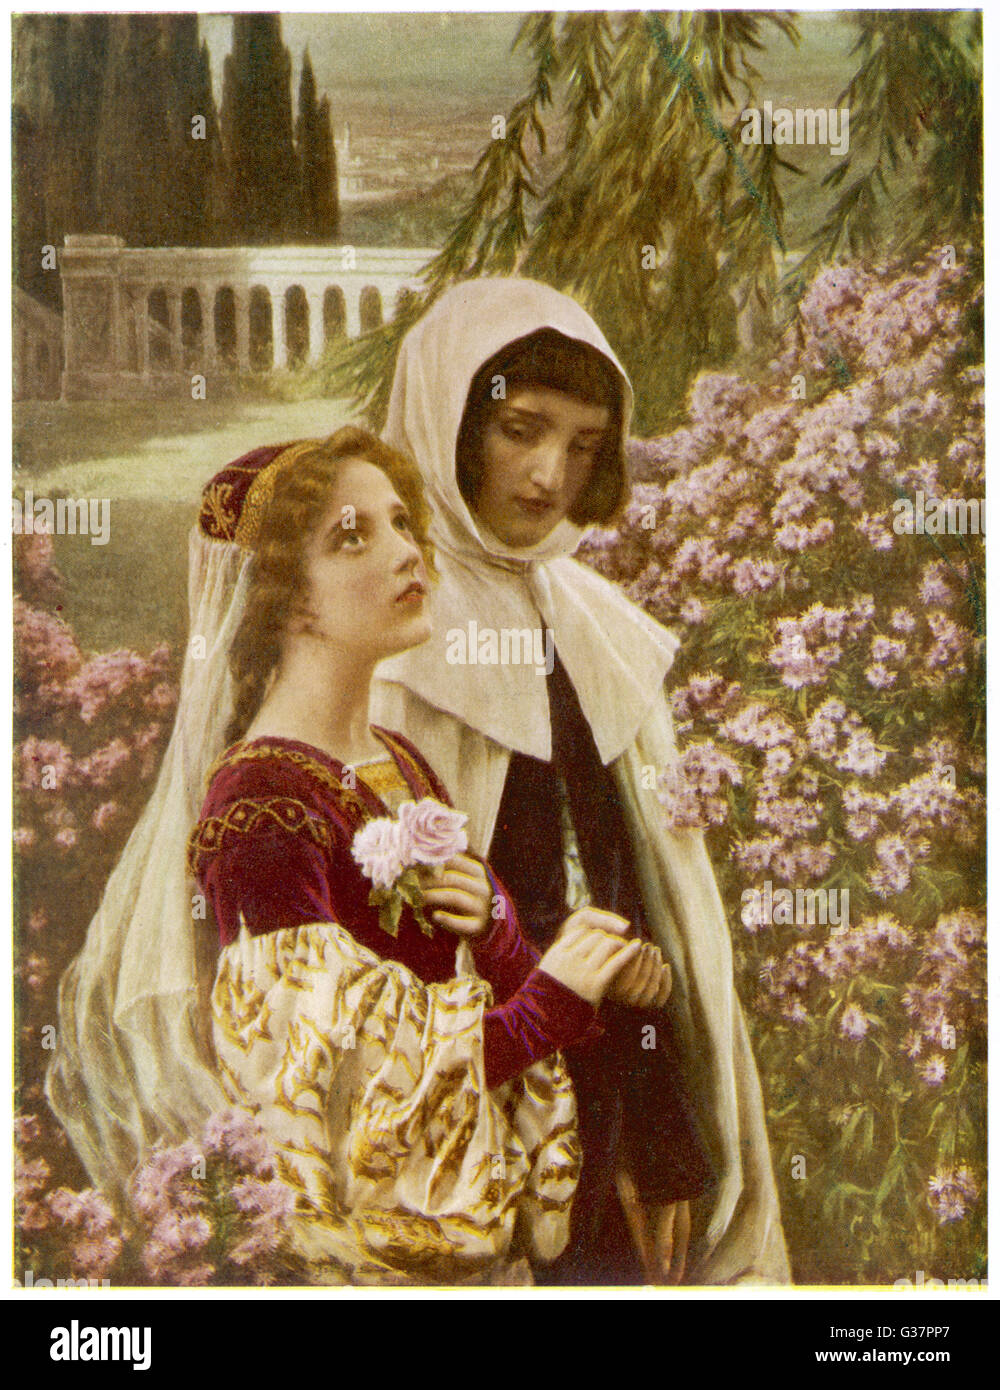 DANTE ALIGHIERI At age 18, he meets his  beloved Beatrice again and  walking with her in the garden  inspires him to write      Date: 1265 - 1321 Stock Photo